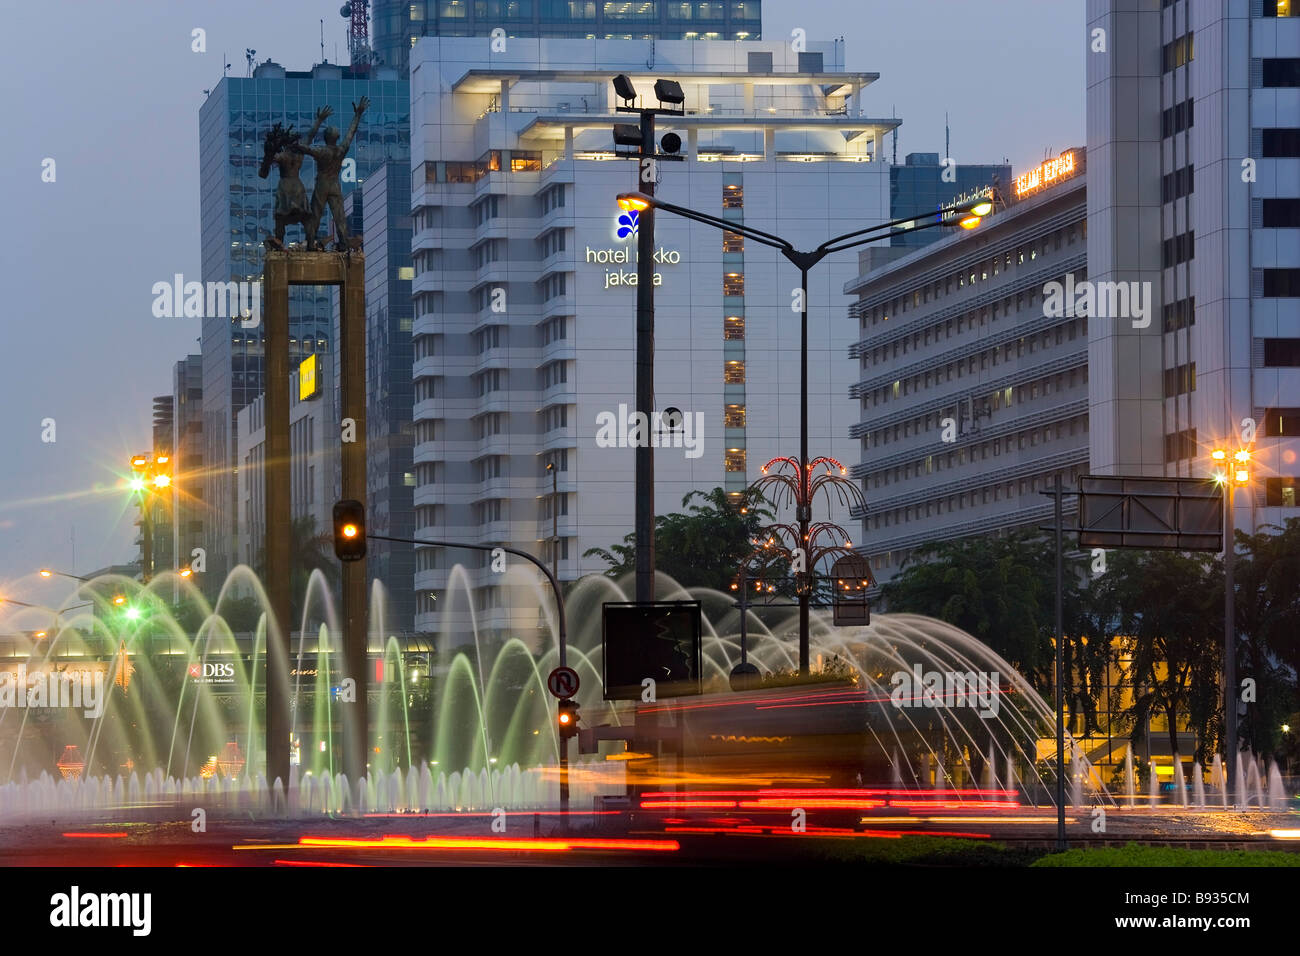 Welcome Monument central Jakarta main intersection of Jalan MH Thamrin